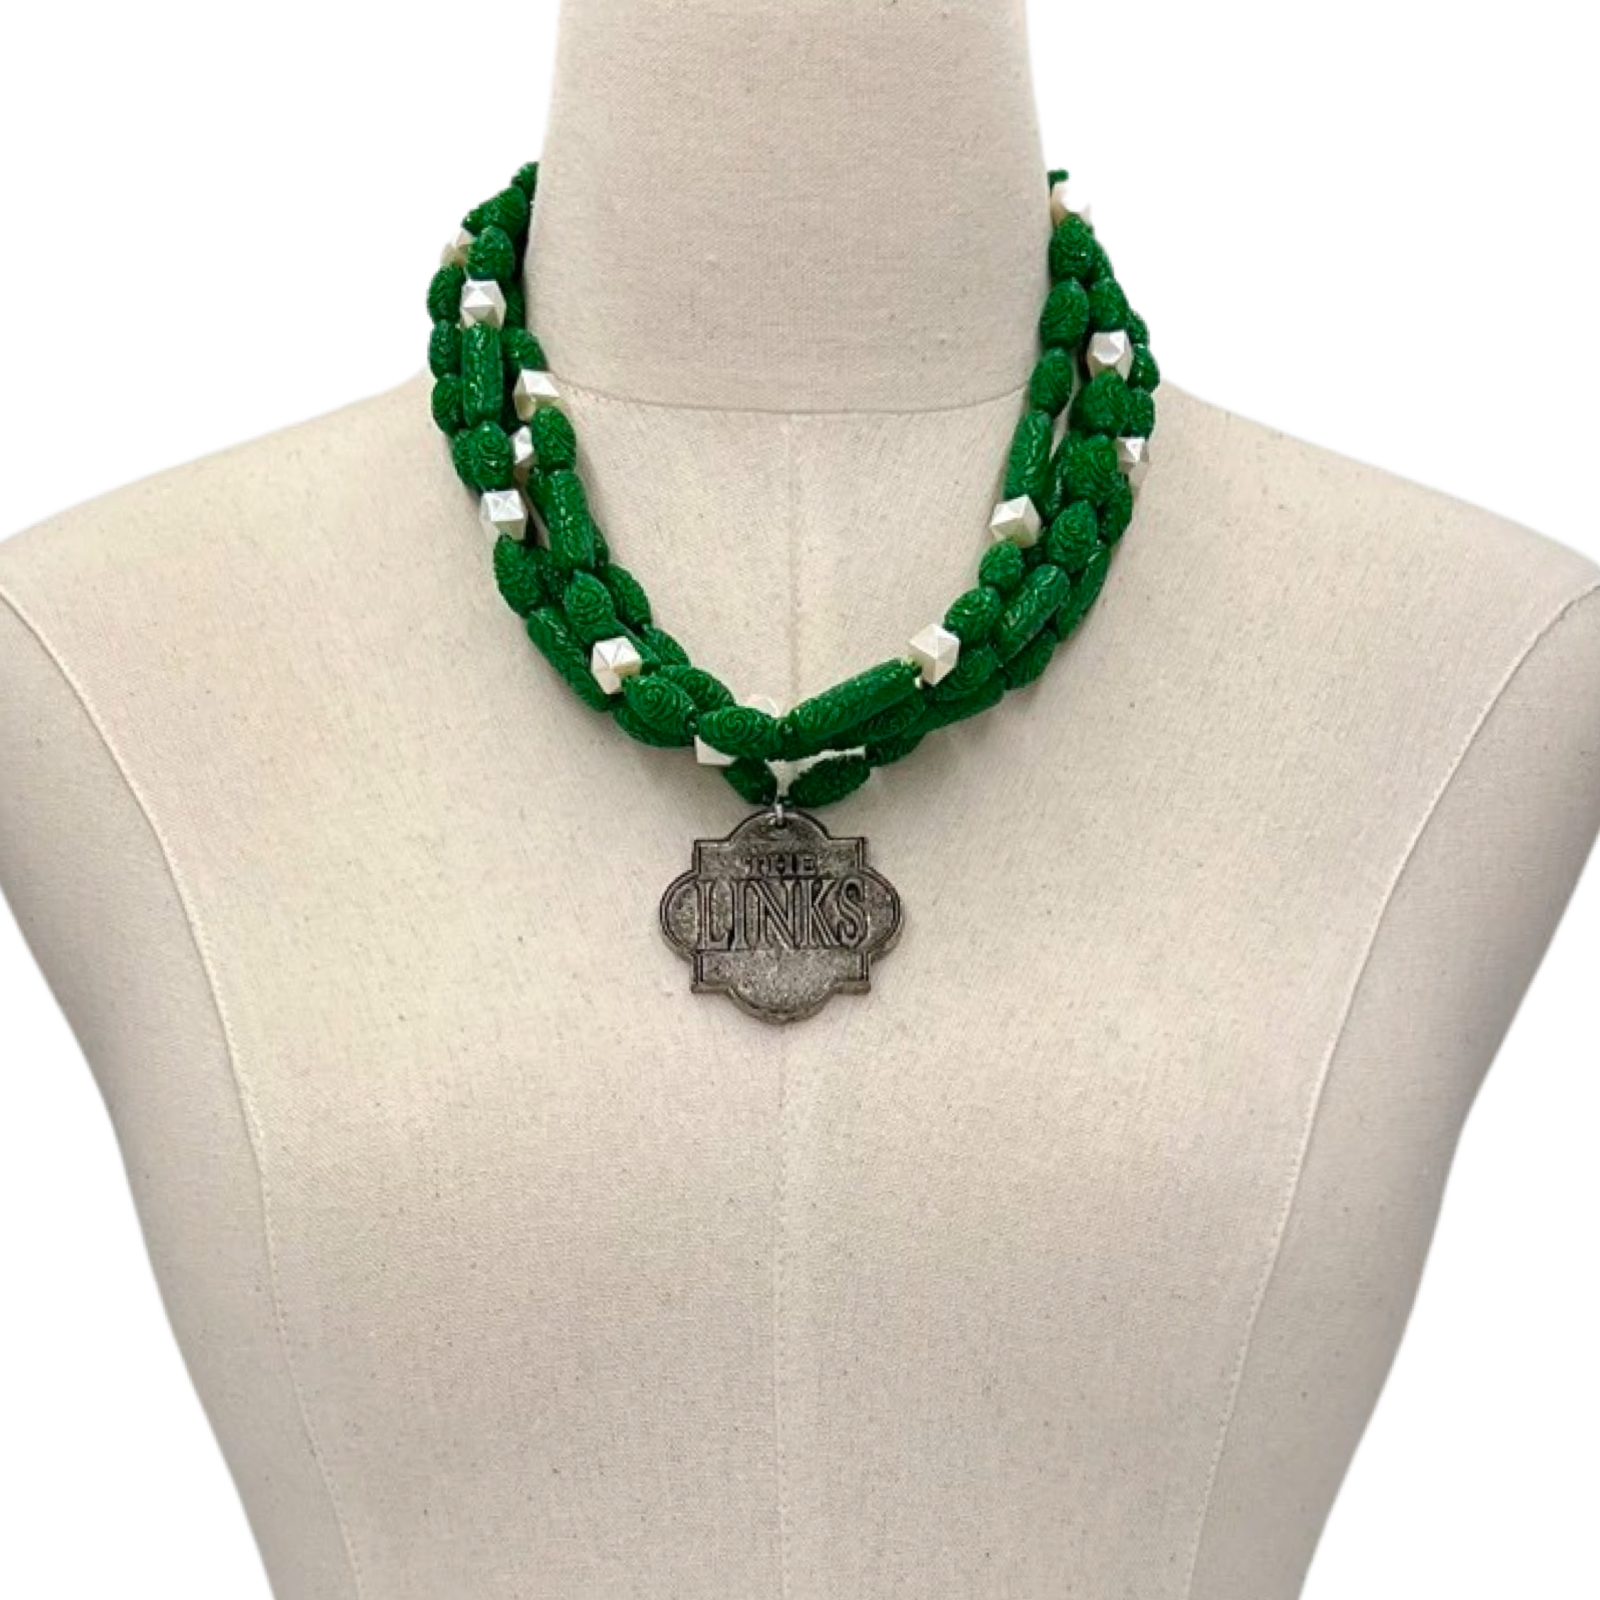 Links Crave Green Necklace